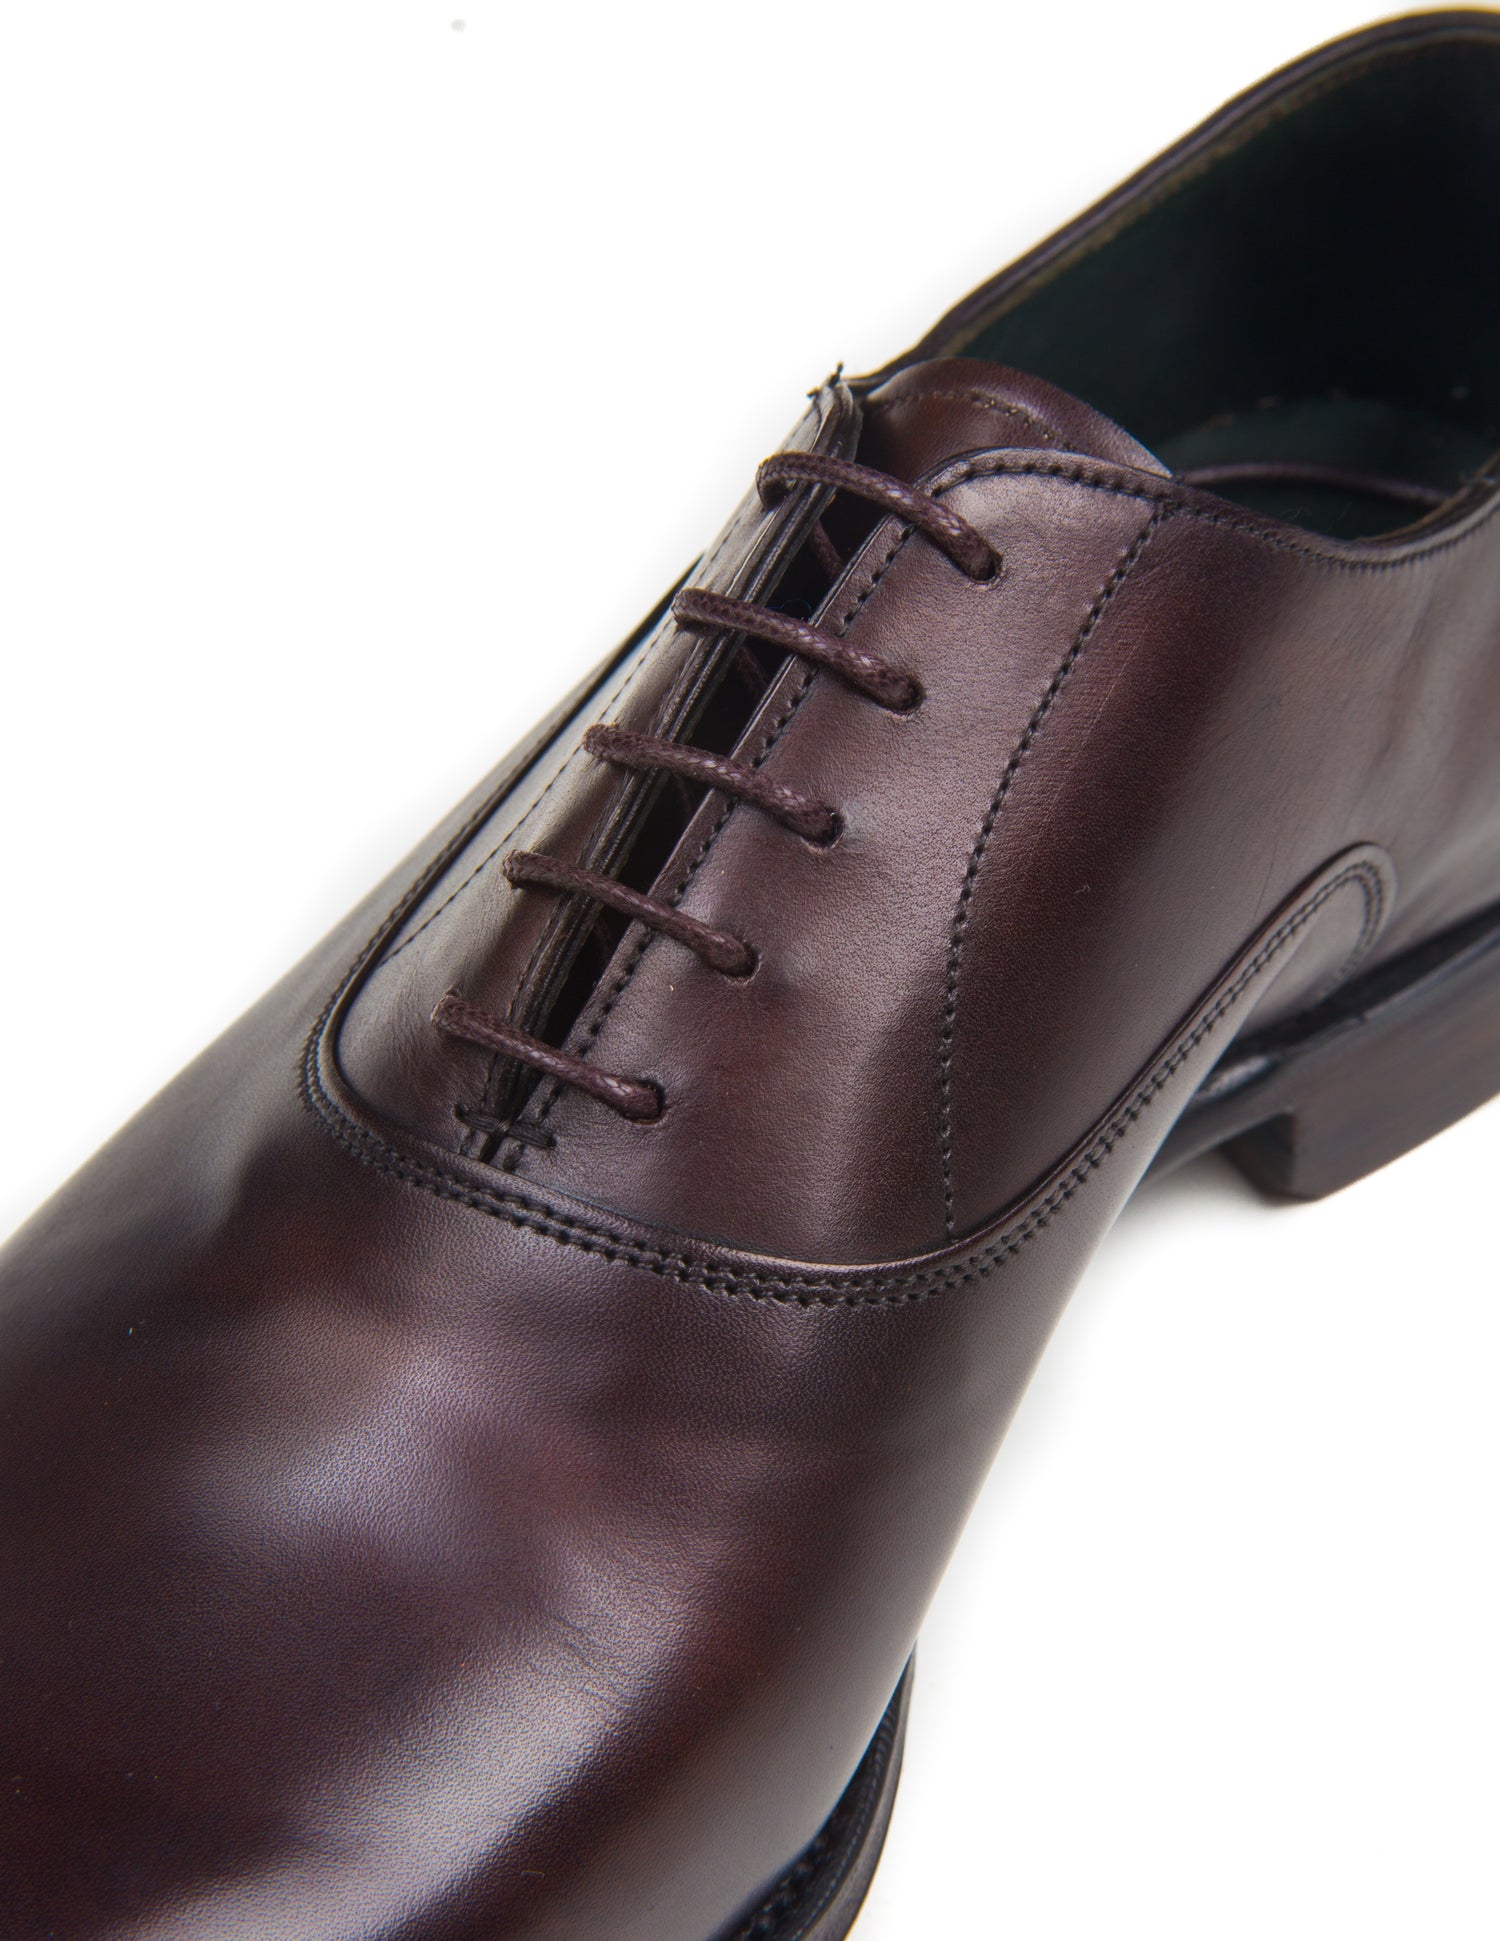 Detail of laces and stitching on Joseph Cheaney Welland Oxford Shoes in Mocha Calf Leather